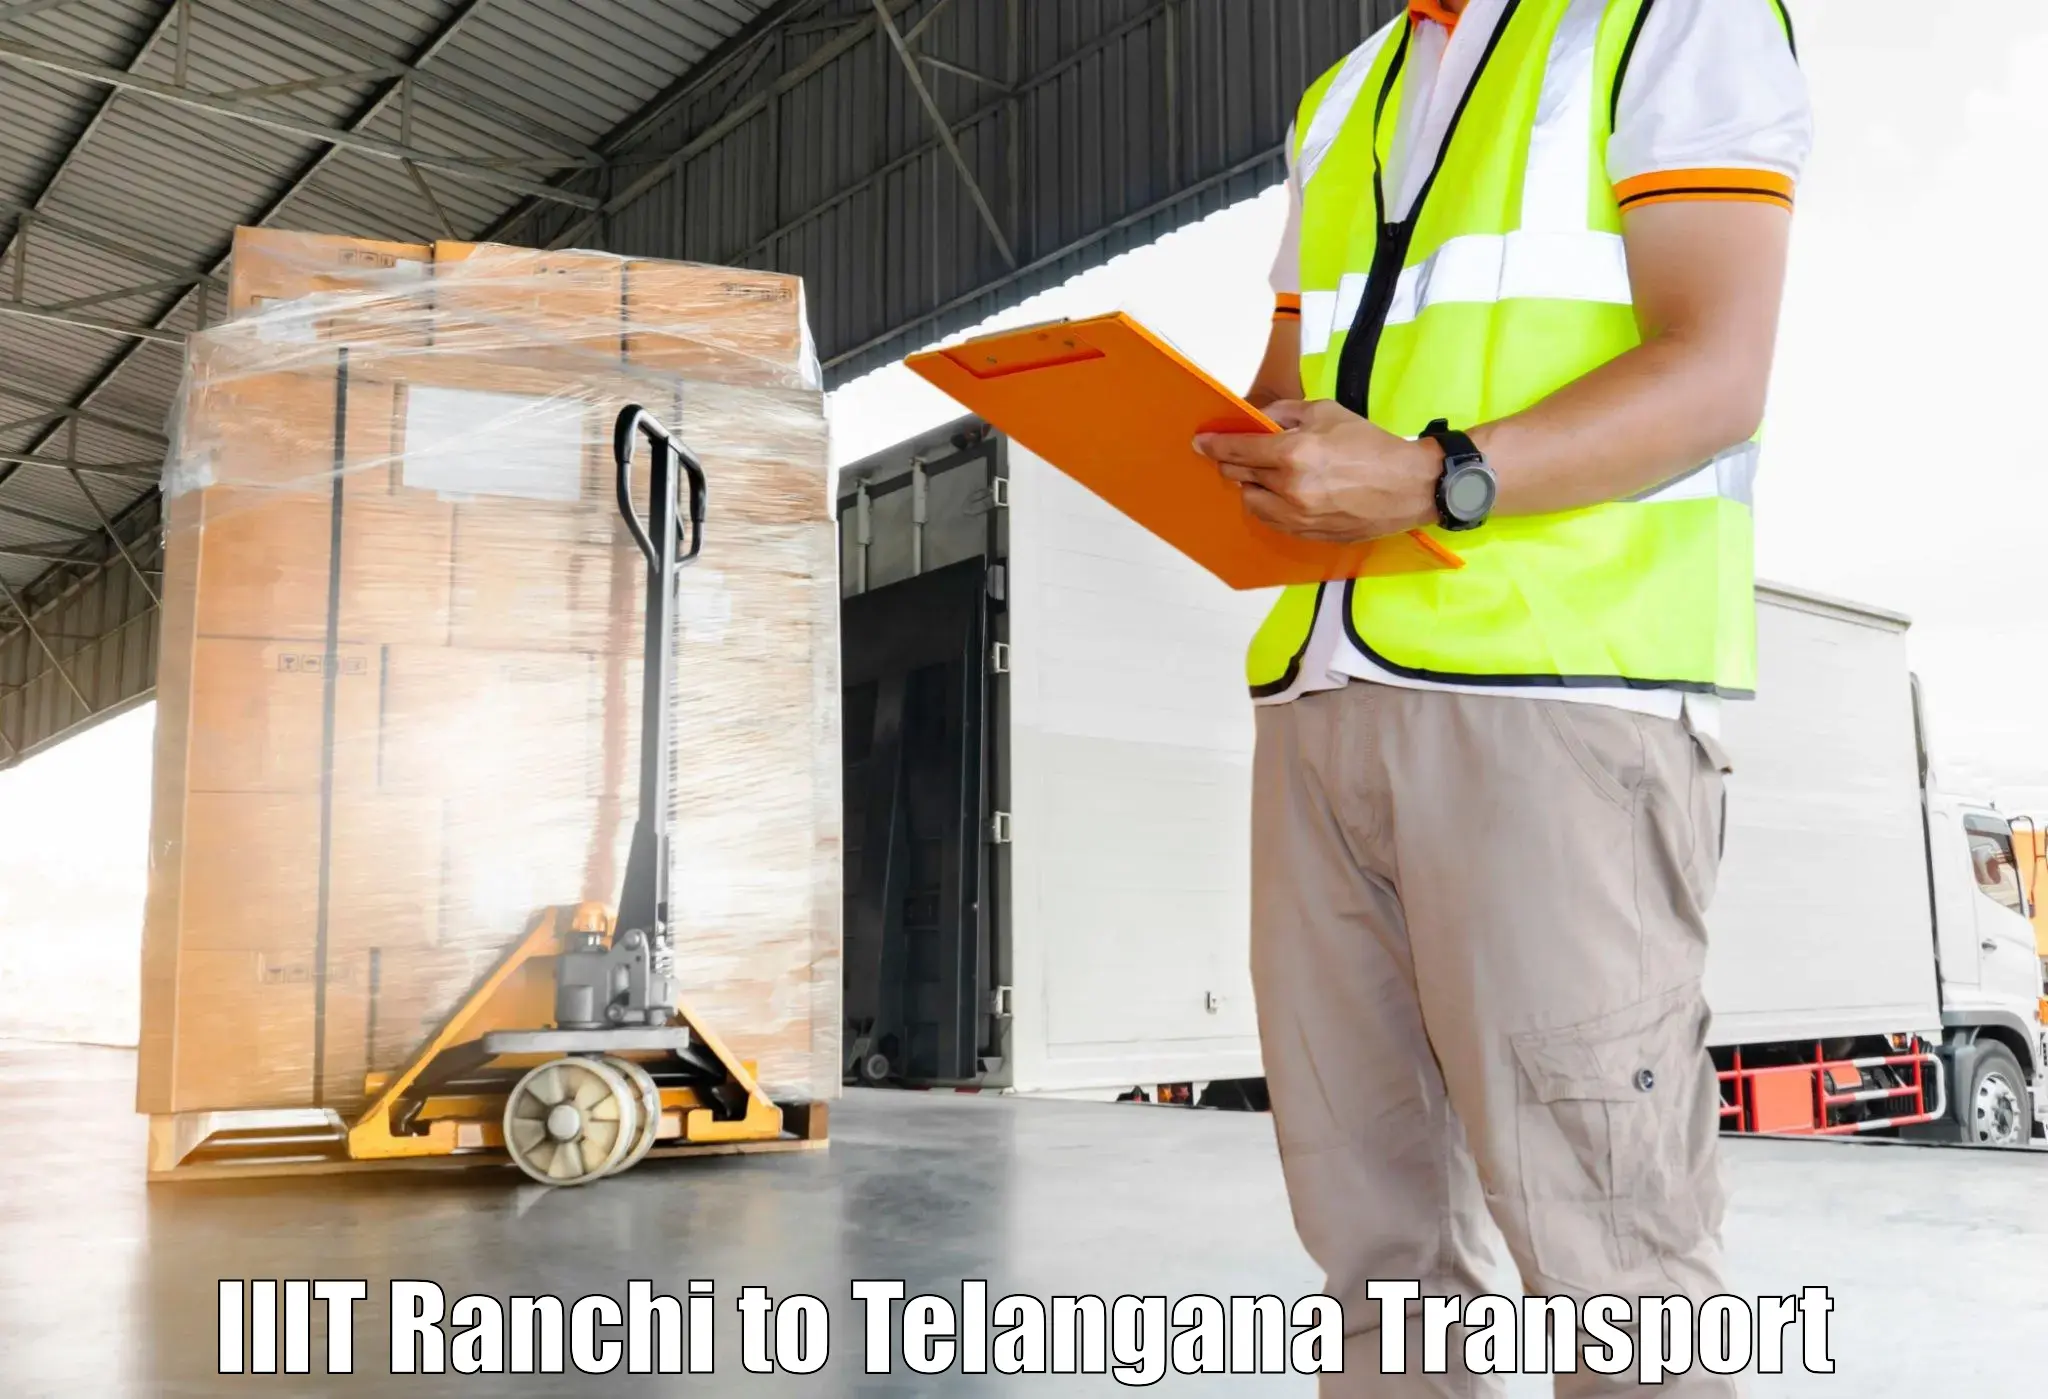 Truck transport companies in India IIIT Ranchi to Shankarpalle